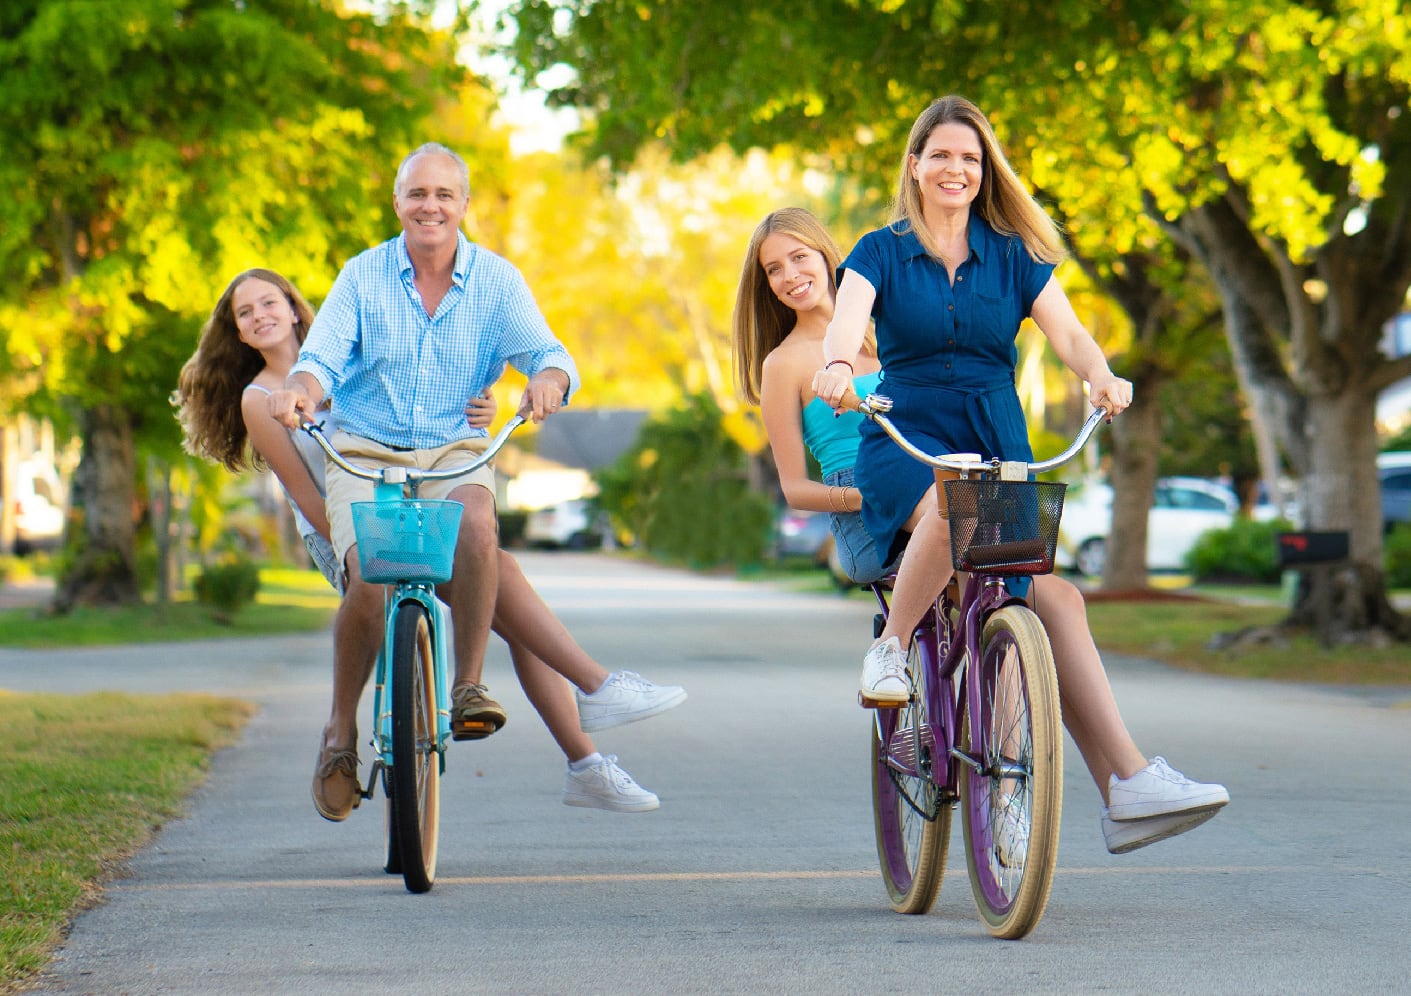 Parents riding bikes through neighborhood with teen daughters on the. back